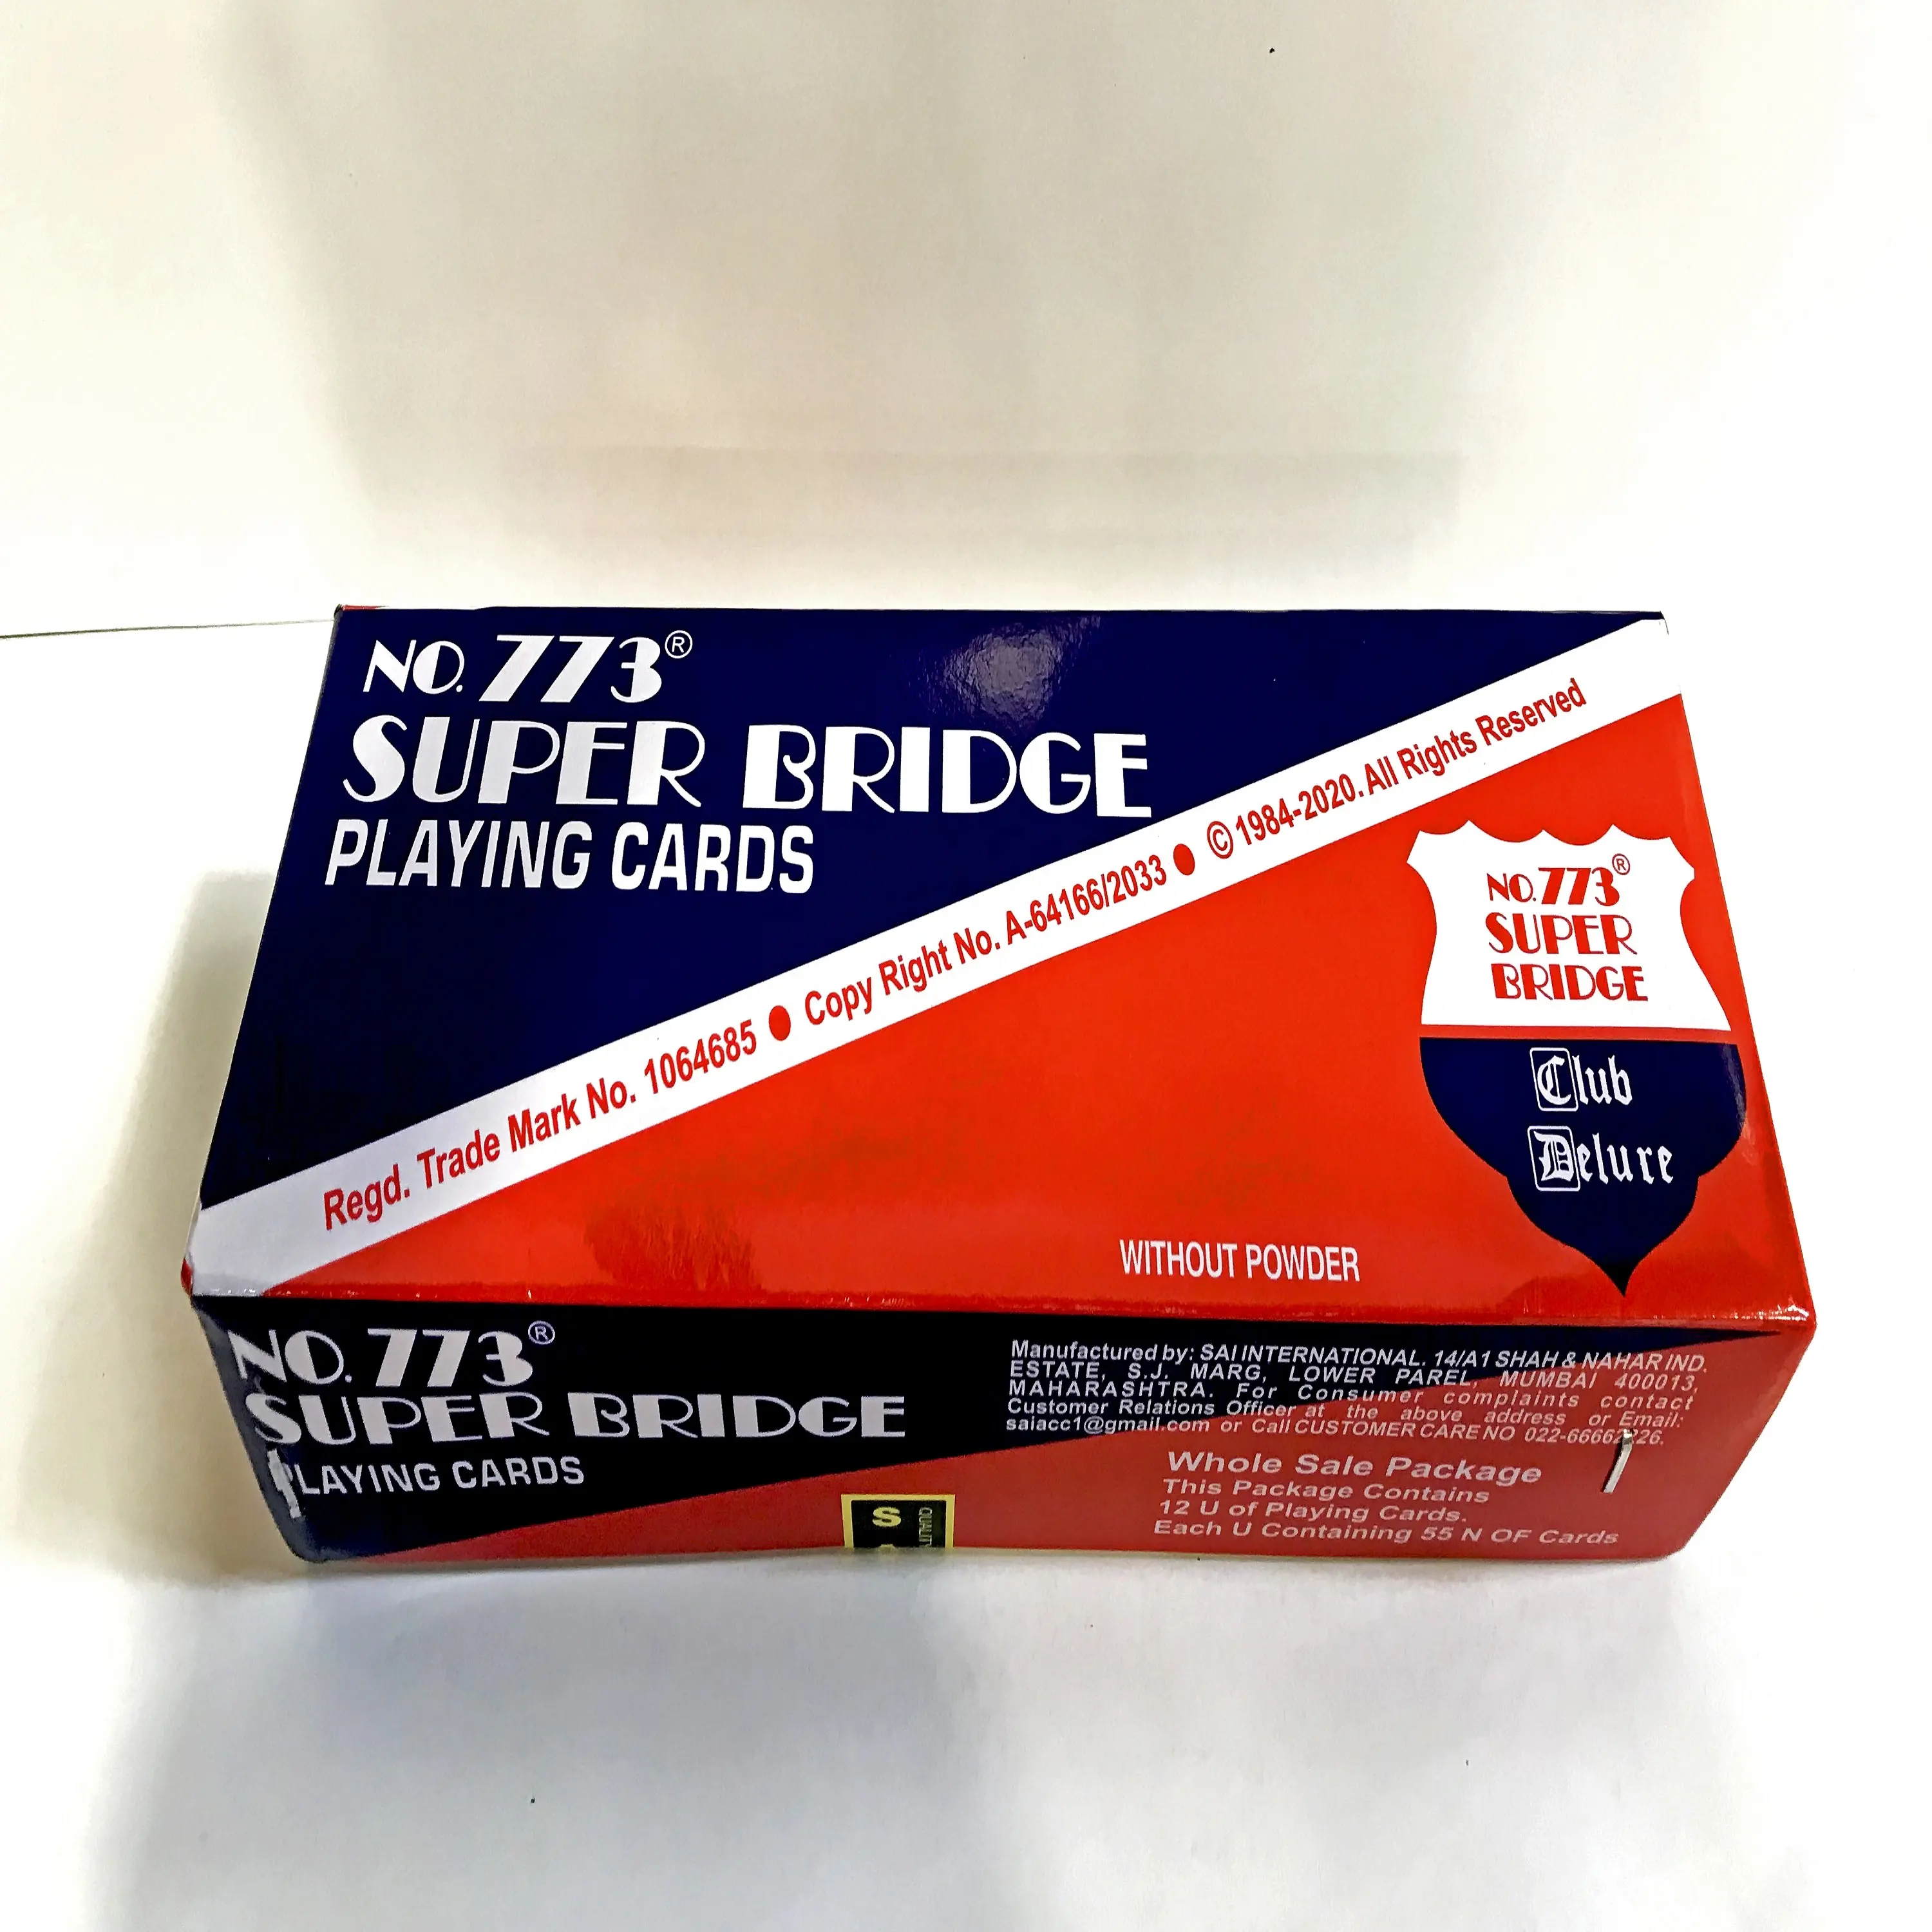 Factory Wholesale High Quality casino poker Super Bridge 773 Paper Playing Cards from indian seller and manufacturer